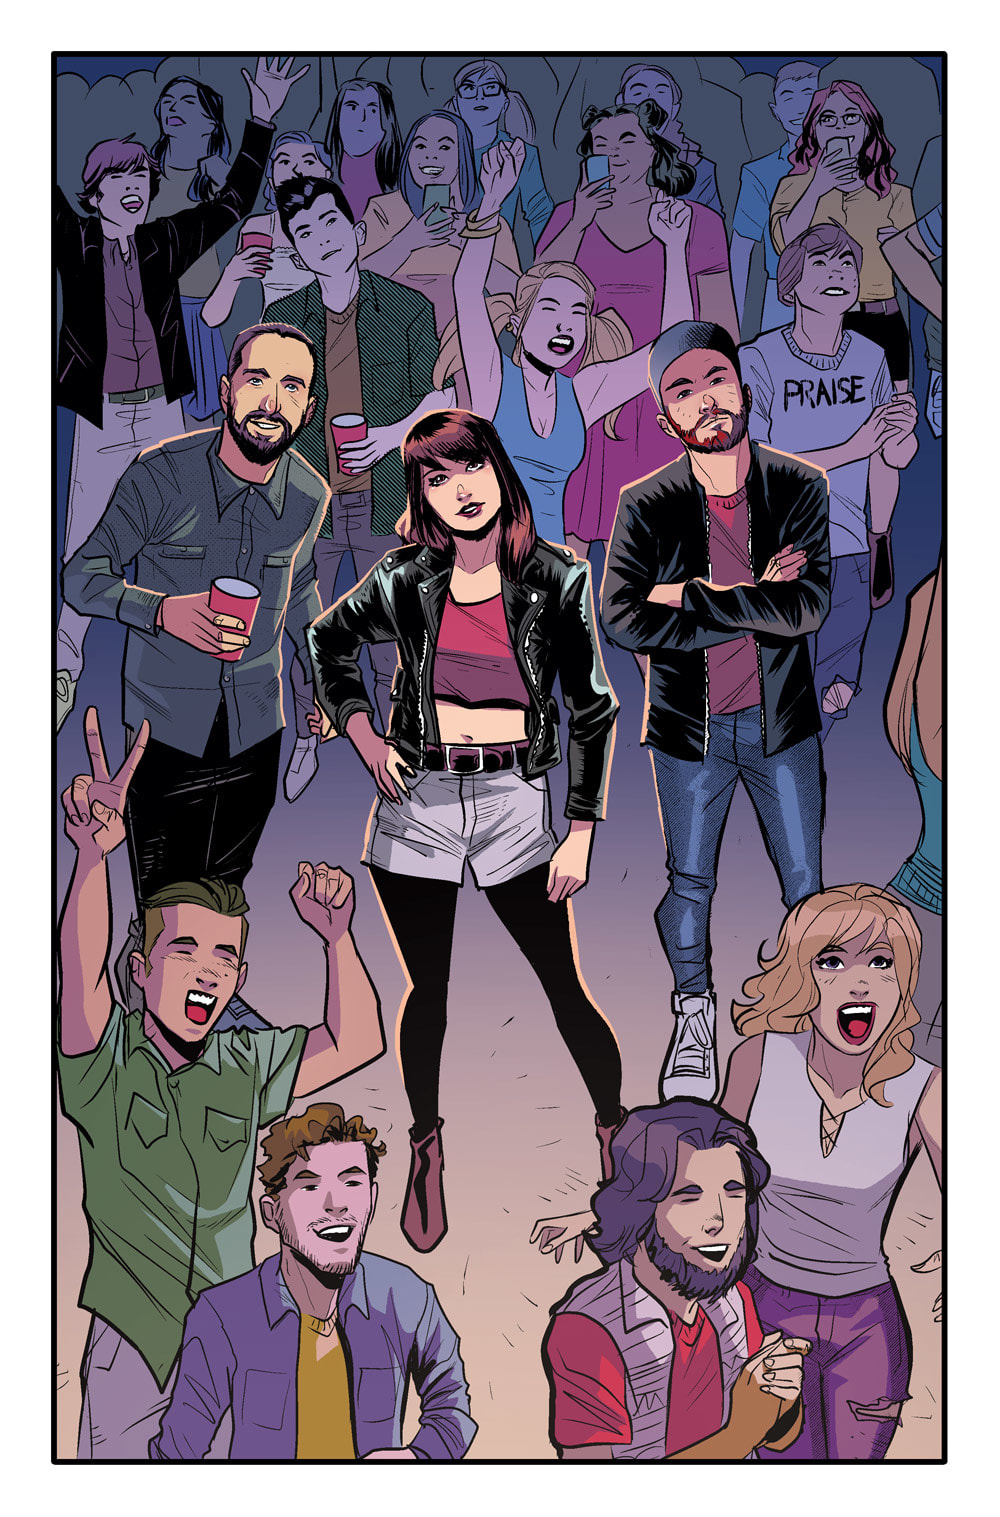 First Look at CHVRCHES in the Comic Book Series The Archies